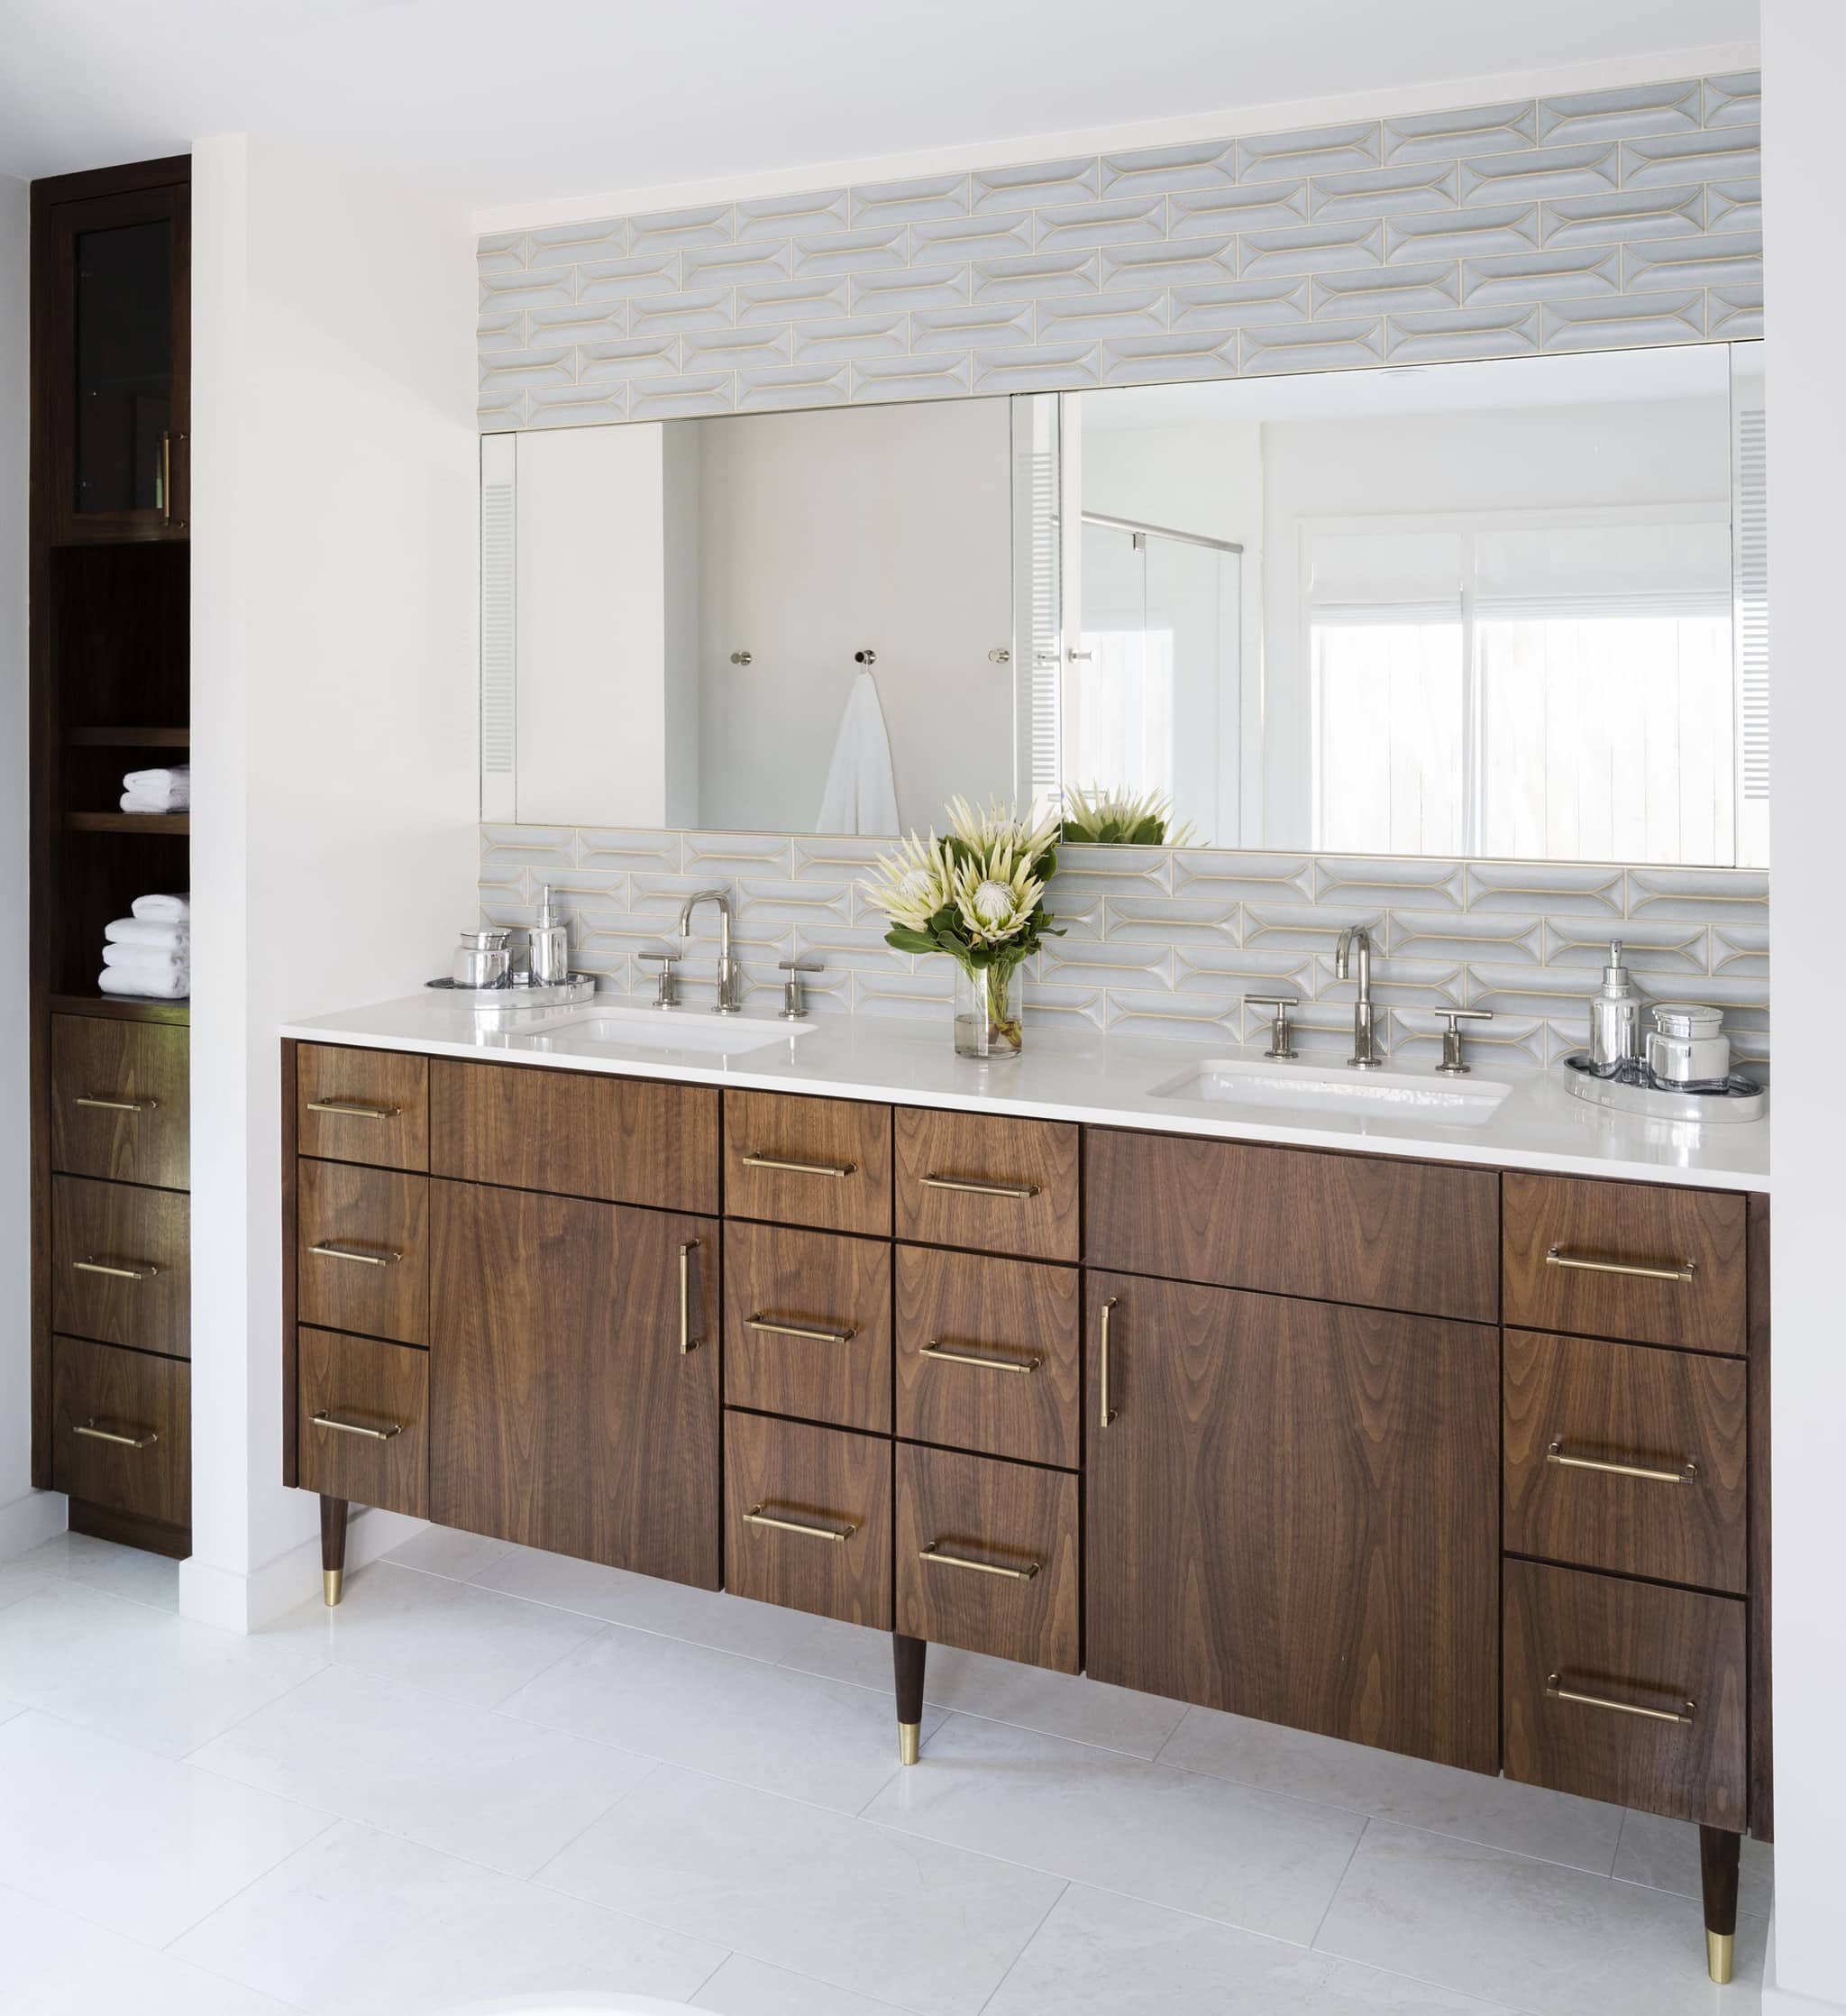 Designed by Laura U, this master bathroom features Ann Sacks tile and warm woods.